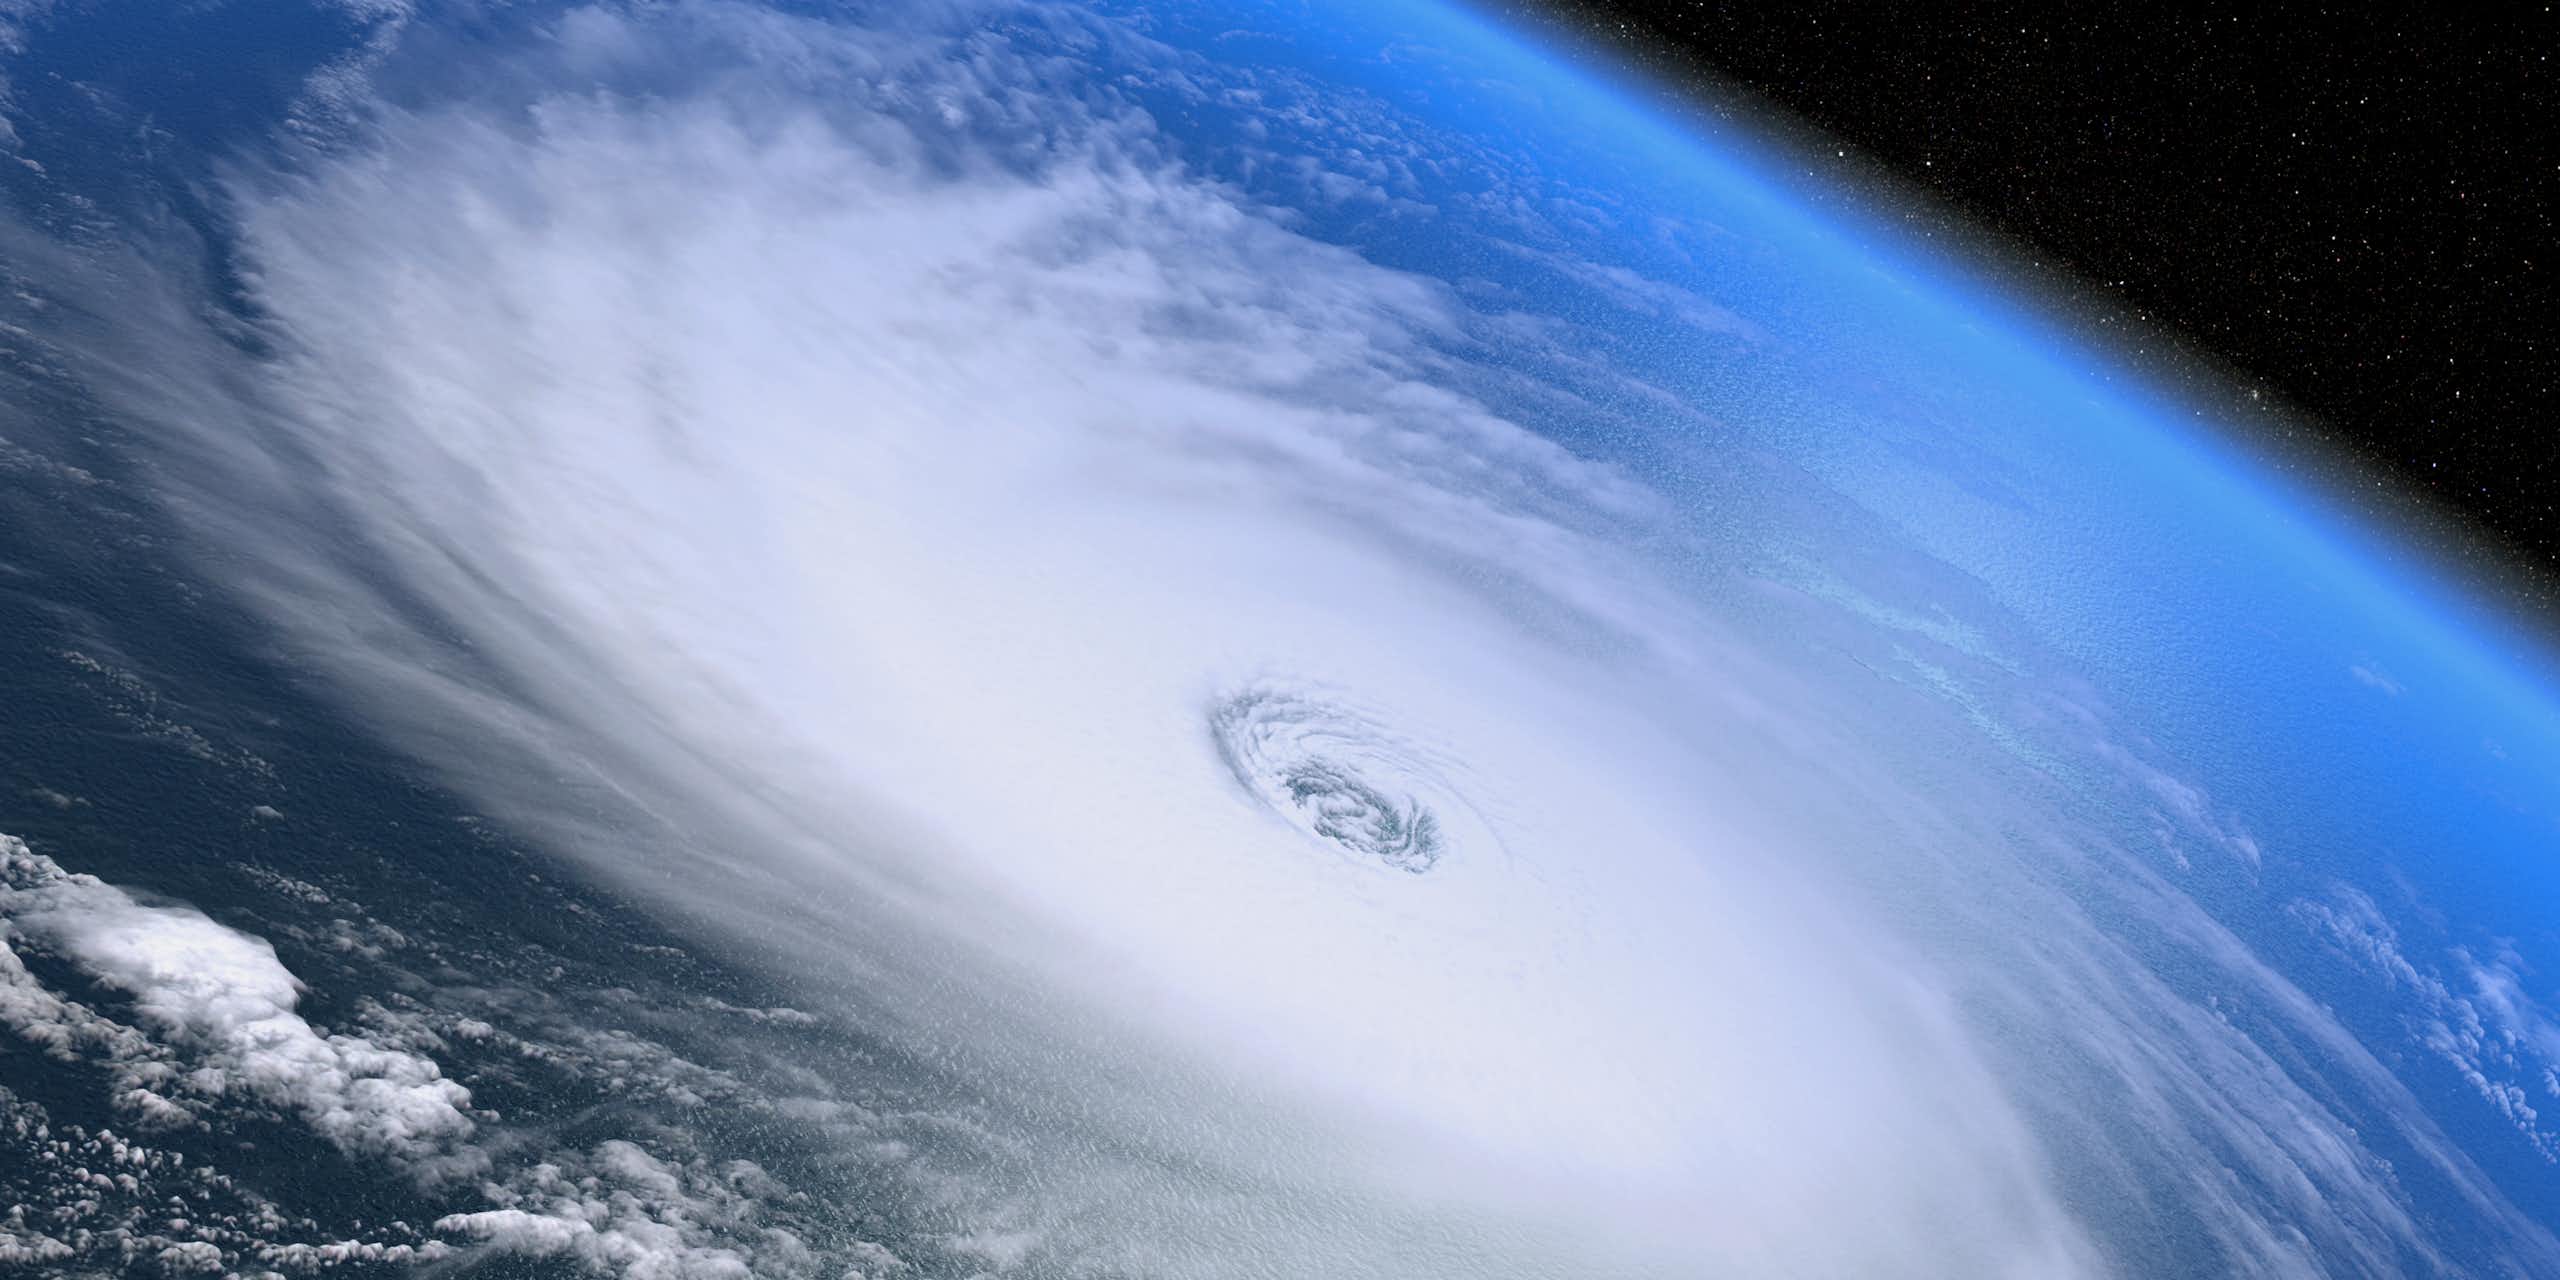 space shot looking down over white hurricane swirls over Earth